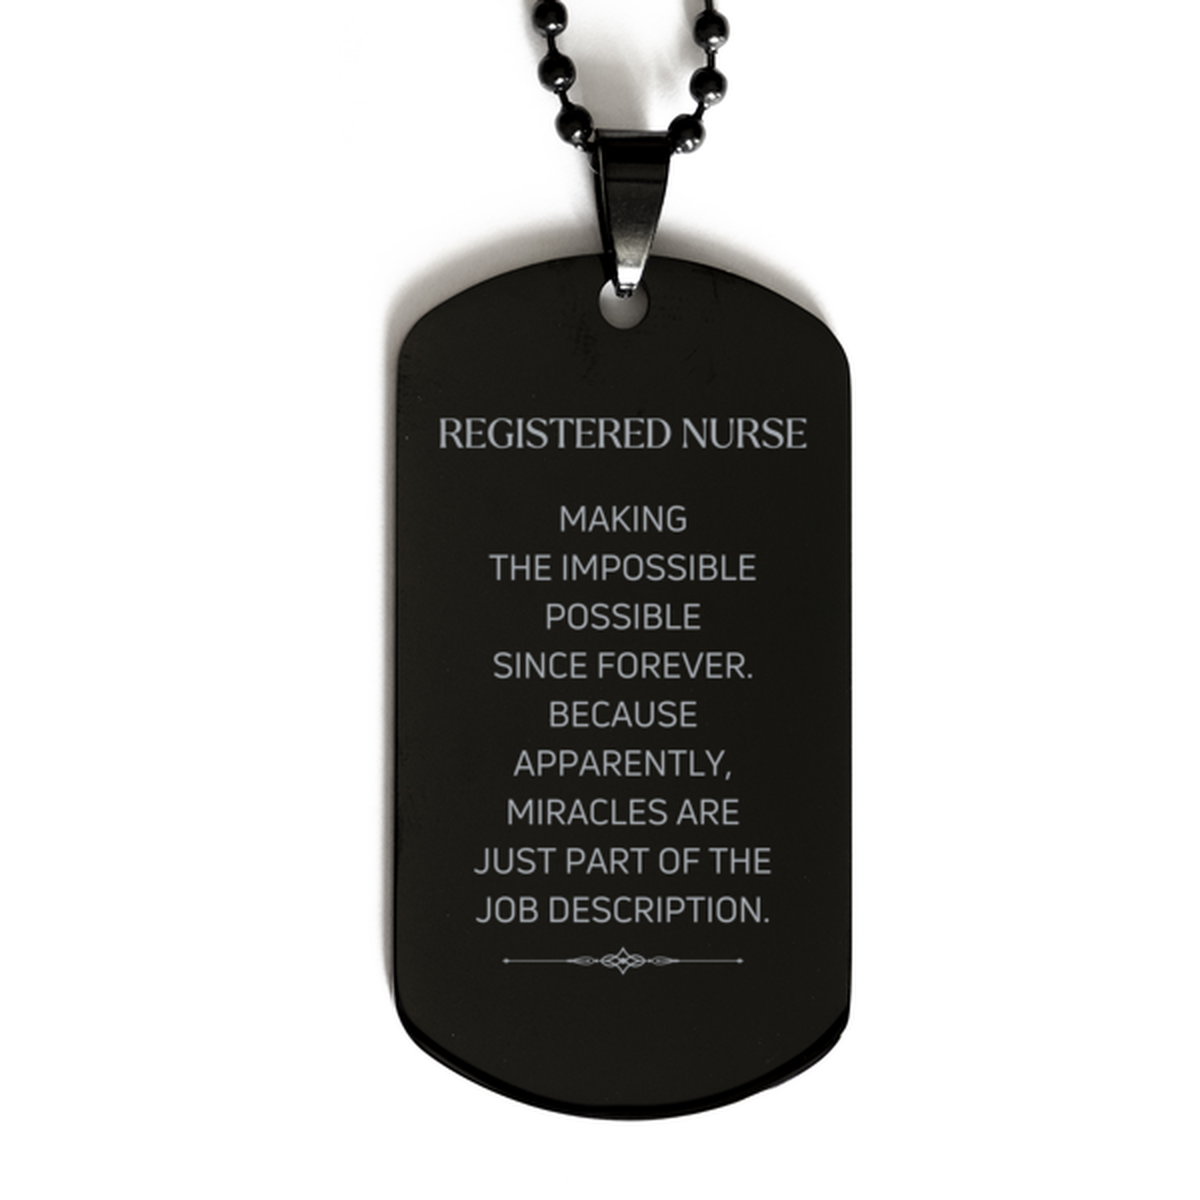 Funny Registered Nurse Gifts, Miracles are just part of the job description, Inspirational Birthday Black Dog Tag For Registered Nurse, Men, Women, Coworkers, Friends, Boss